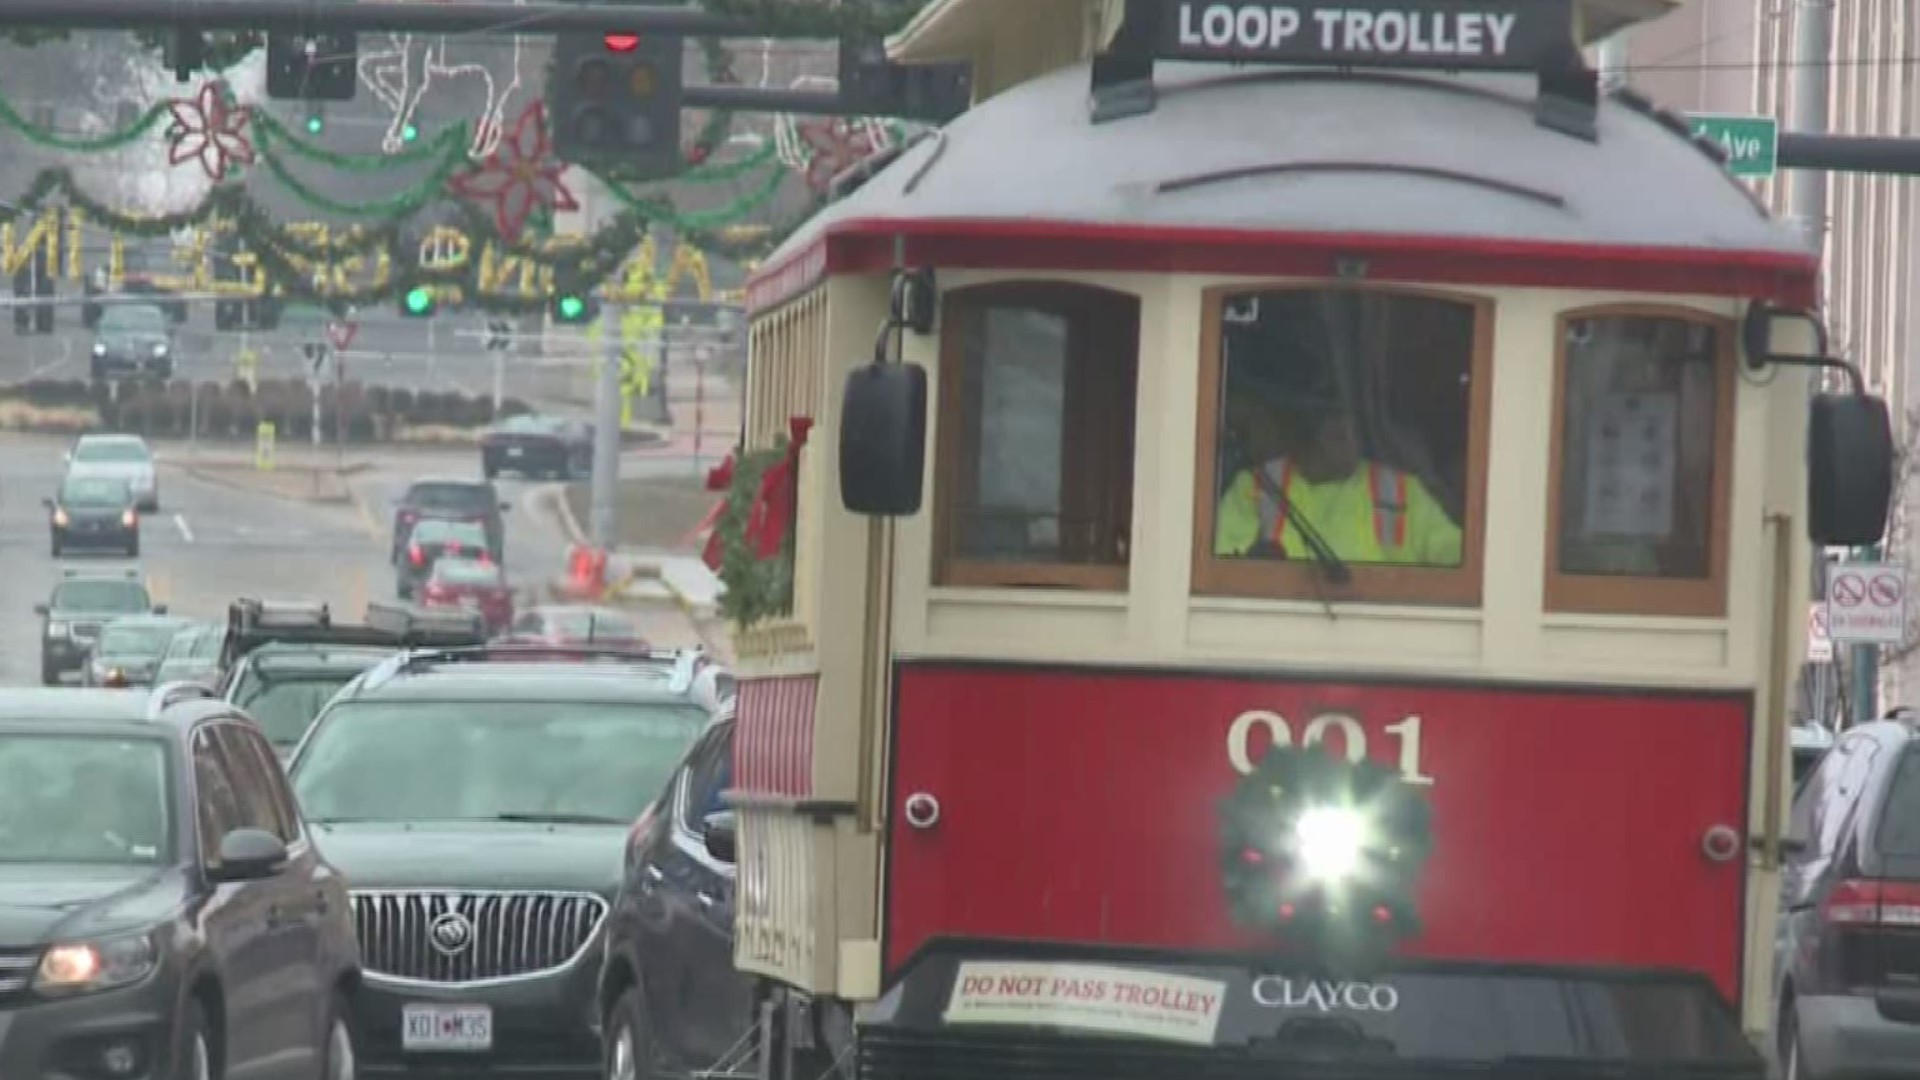 The Trolley sold just 16,000 tickets in its first 11 months